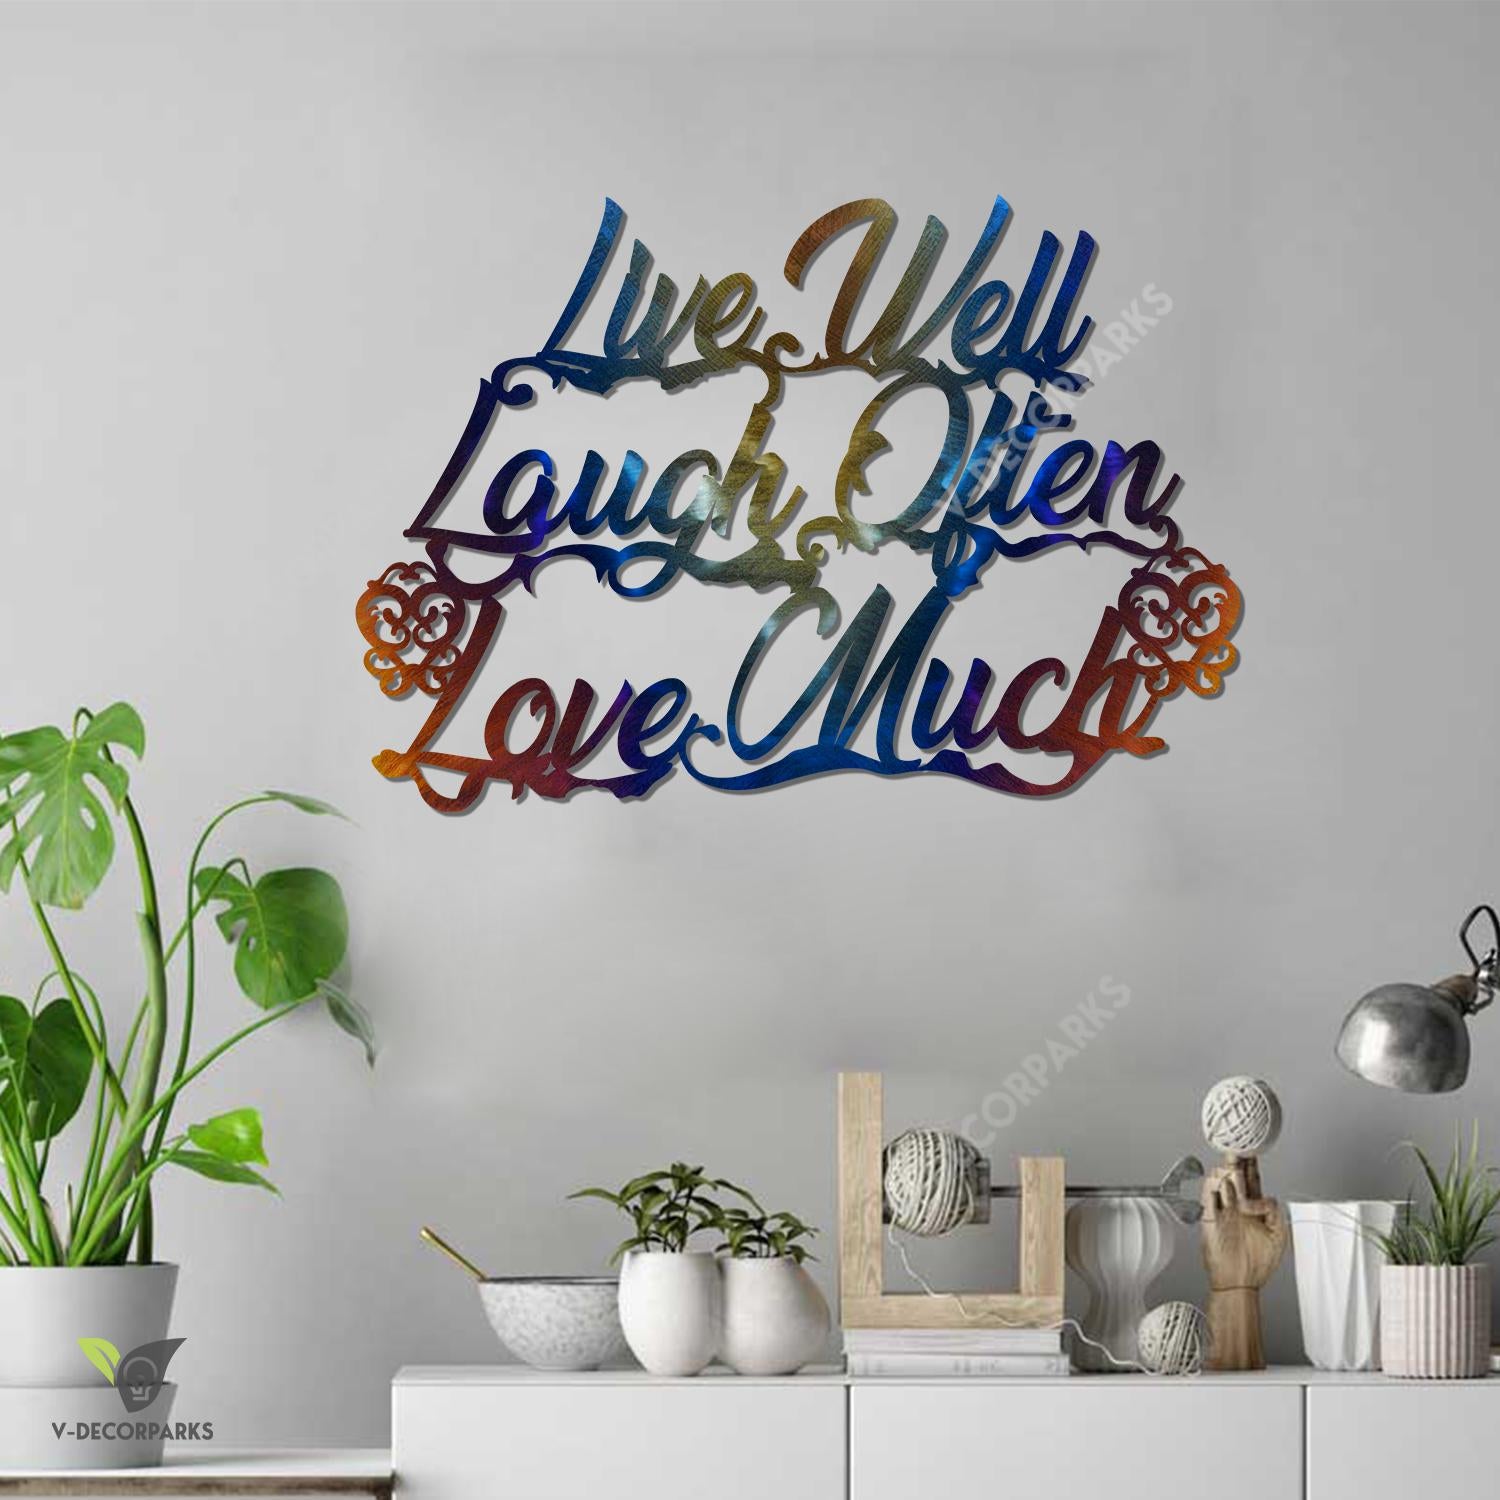 Live Well Laugh Often Love Much Colored Wall Art, Inspiration Steel Artwork For Bedroom